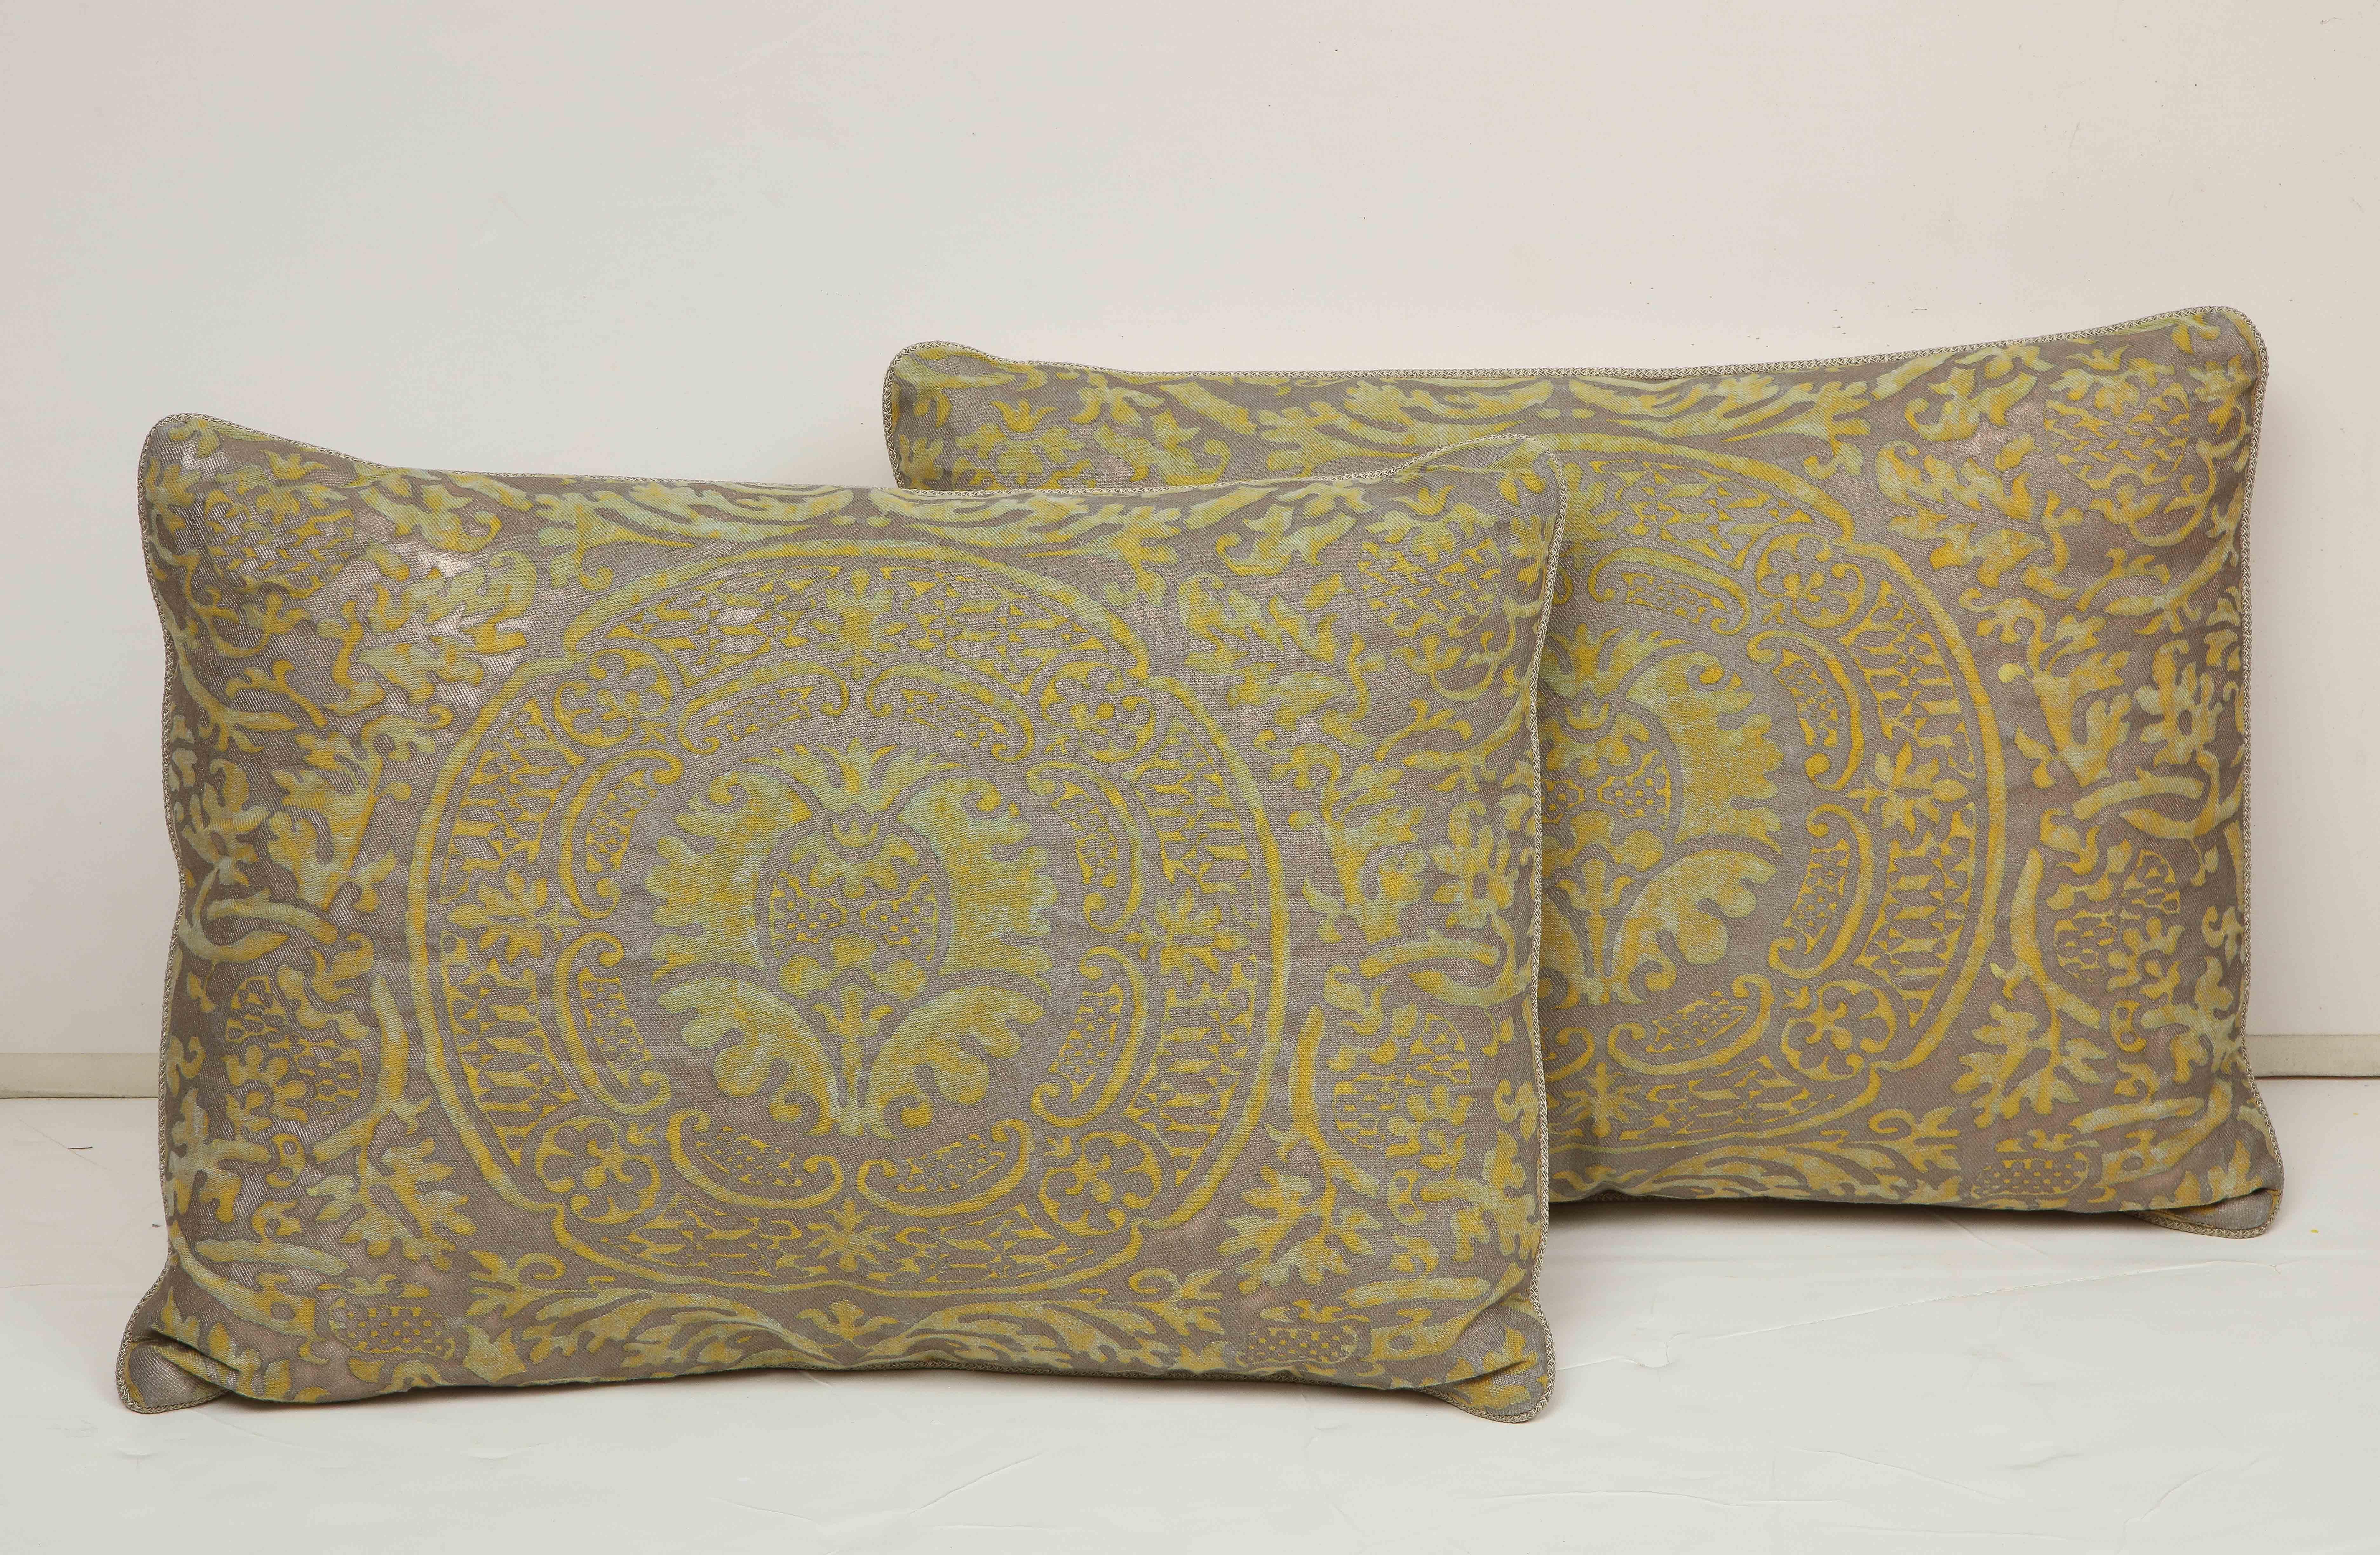 Pair of pillows covered in green and grey Fortuny silk and backed with natural linen. Individually priced at $475.